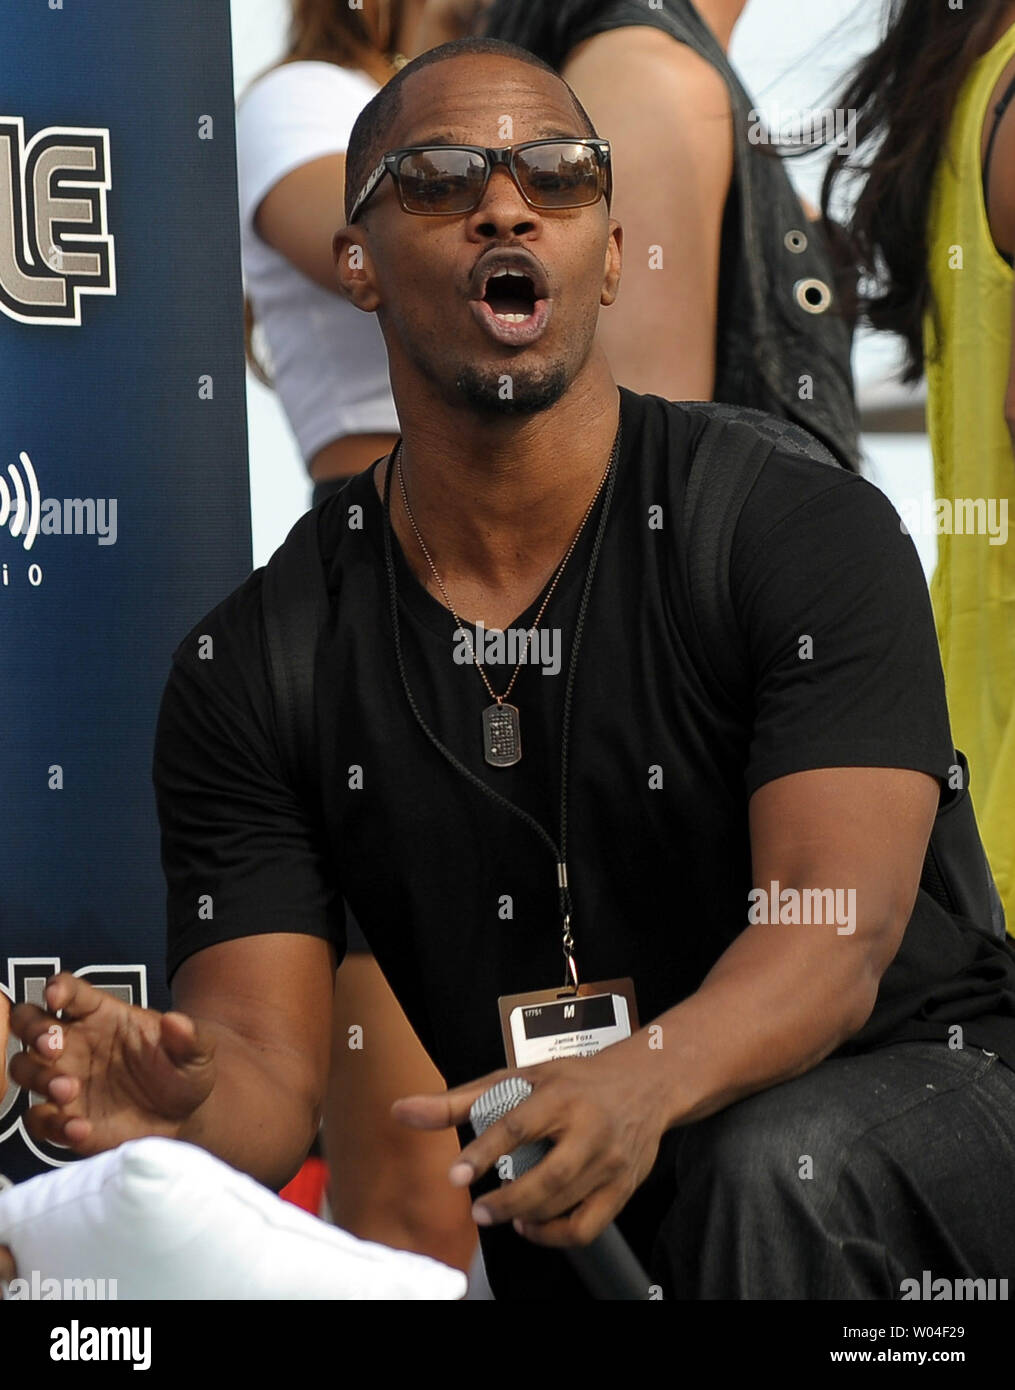 Jamie Foxx performs at the Bud Light Hotel during the week of Super Bowl XLIV in Miami Beach, Florida, on February 5, 2010.  Super Bowl XLIV will feature the New Orleans Saints vs. the Indianapolis Colts on February 7.   UPI/Rob Hobson Stock Photo